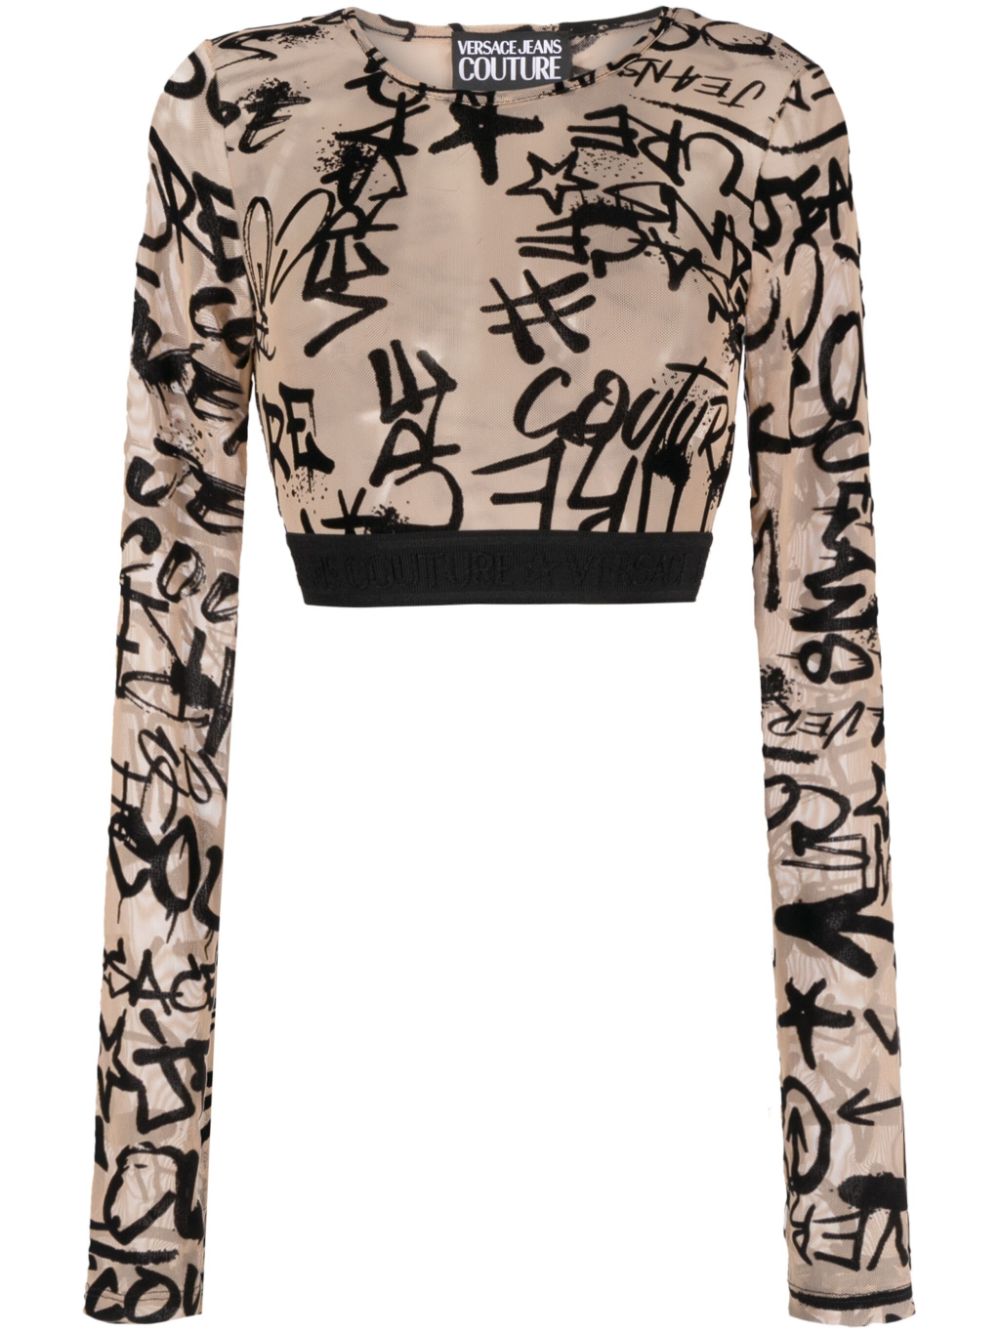 Versace Jeans Couture logo-print Cropped Top - Farfetch